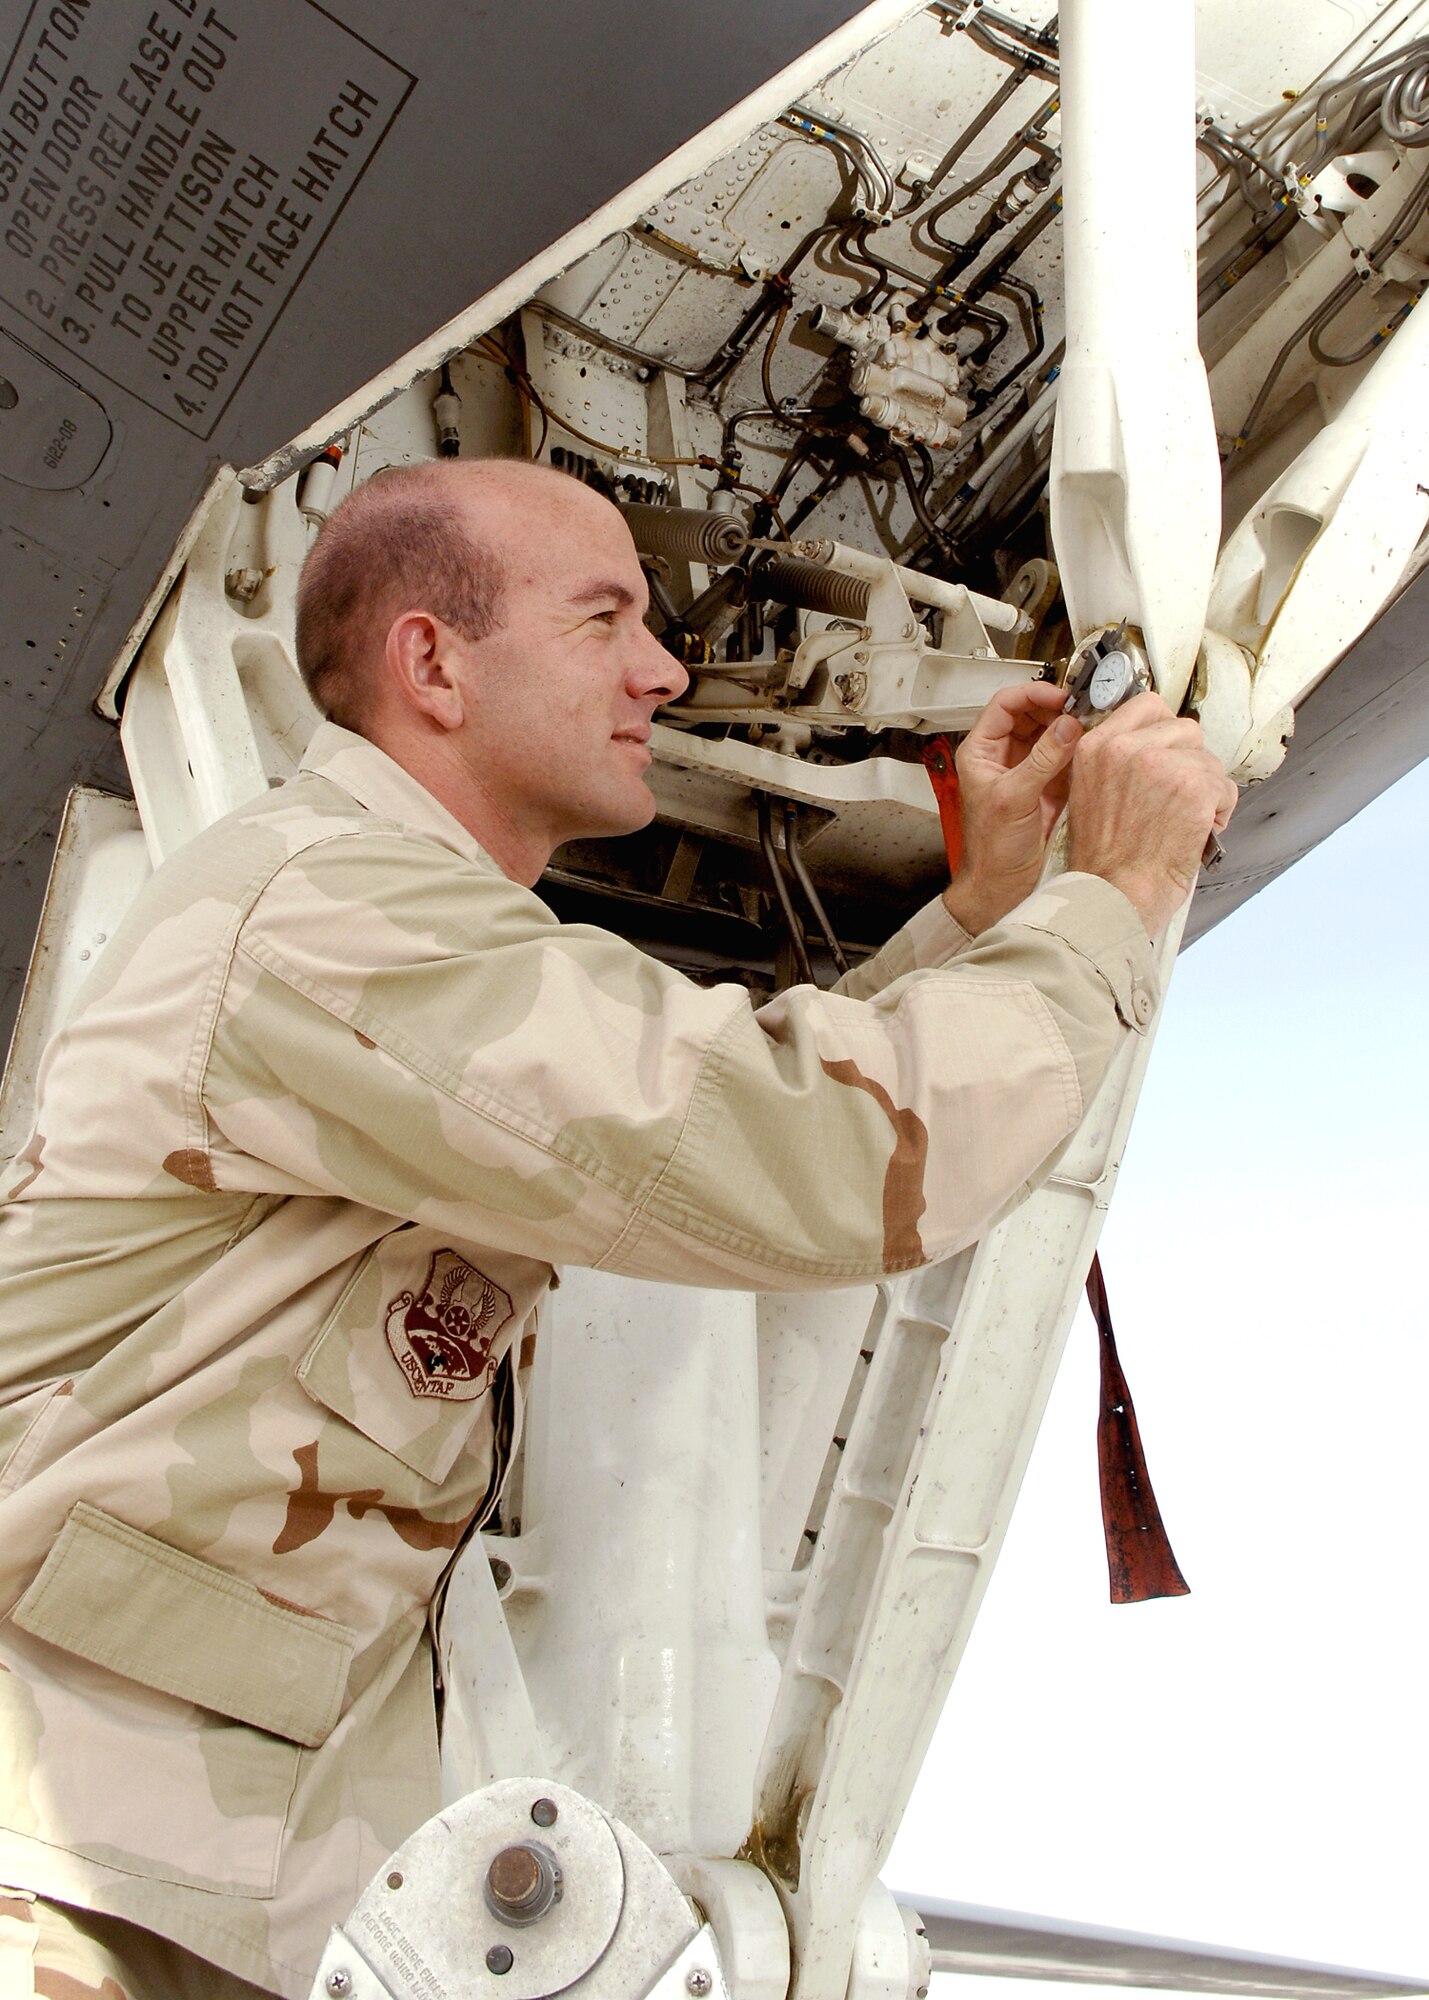 Second Lt. Mark Eilertsen, a depot liaison engineer with the 379th Expeditionary Maintenance Operations Squadron, uses a dial caliper while inspecting the nose landing gear of a B-1 Lancer. (U.S. Air Force photo/Senior Airman Ricky Best) 

